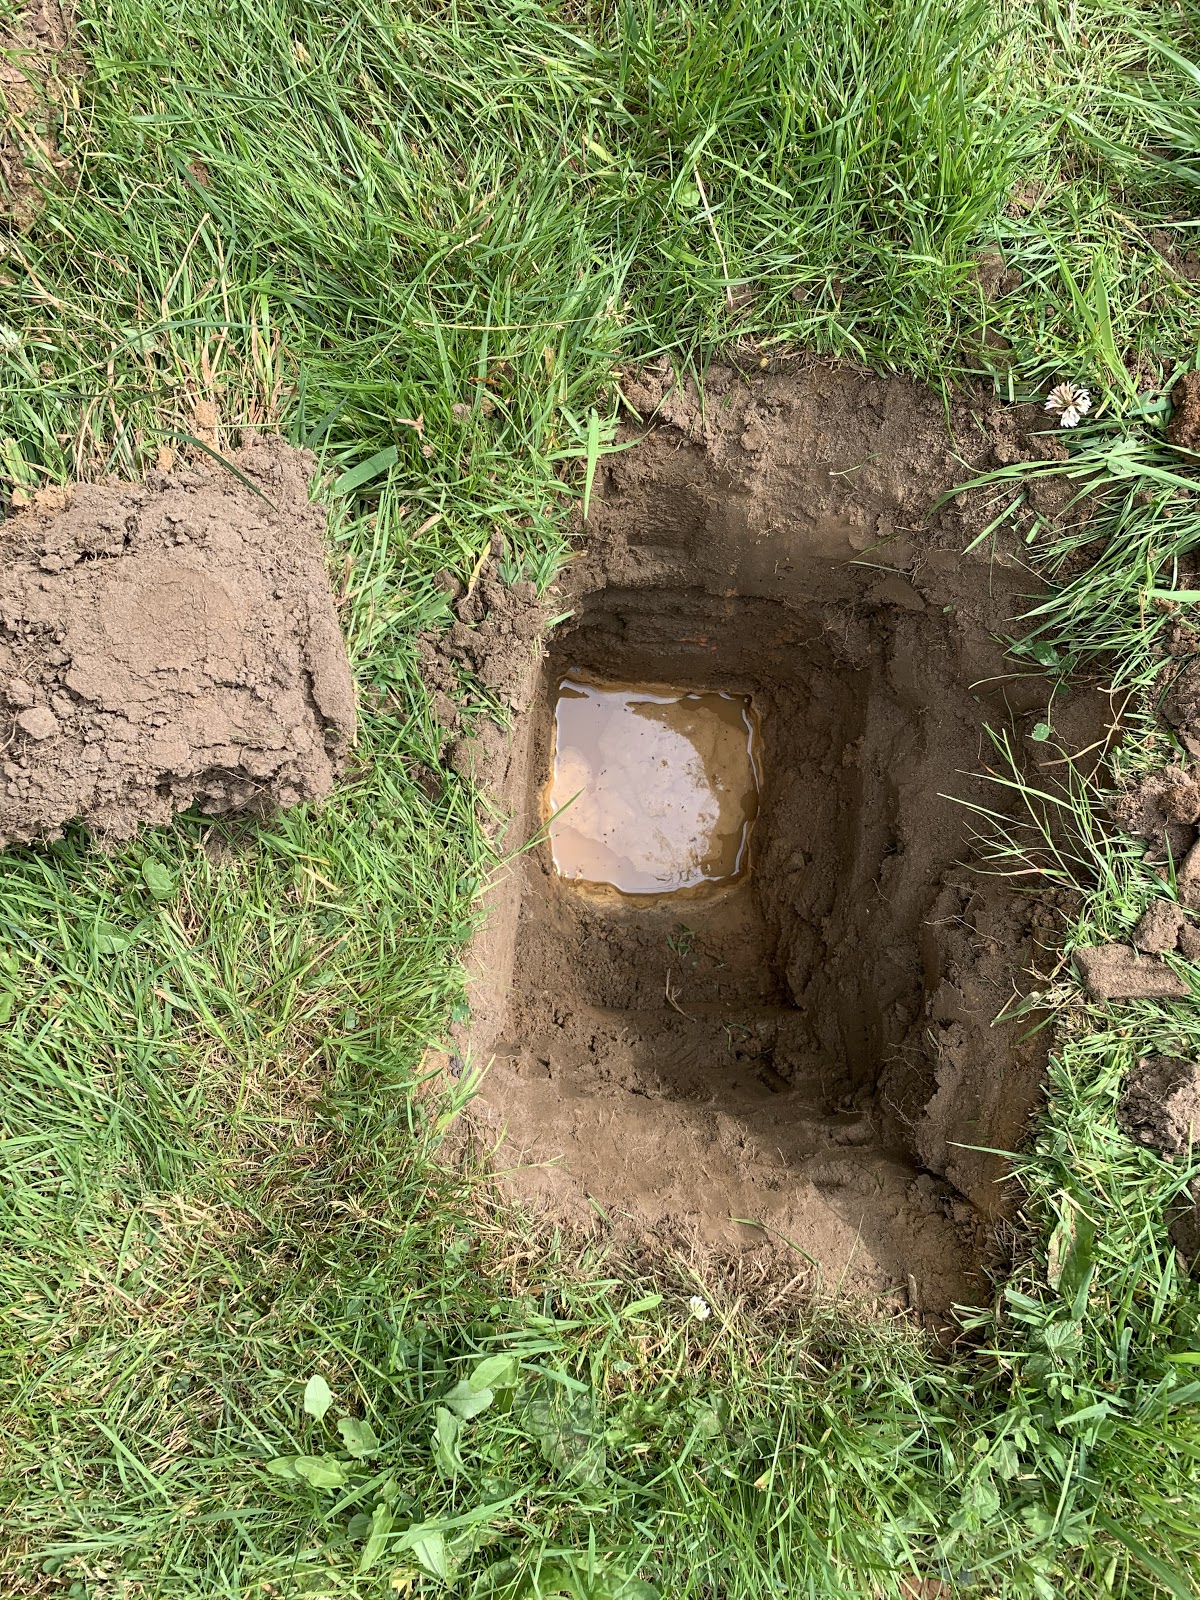 A Soakaway test hole dug to determine the porosity of the ground for a surface water soakaway to be installed.